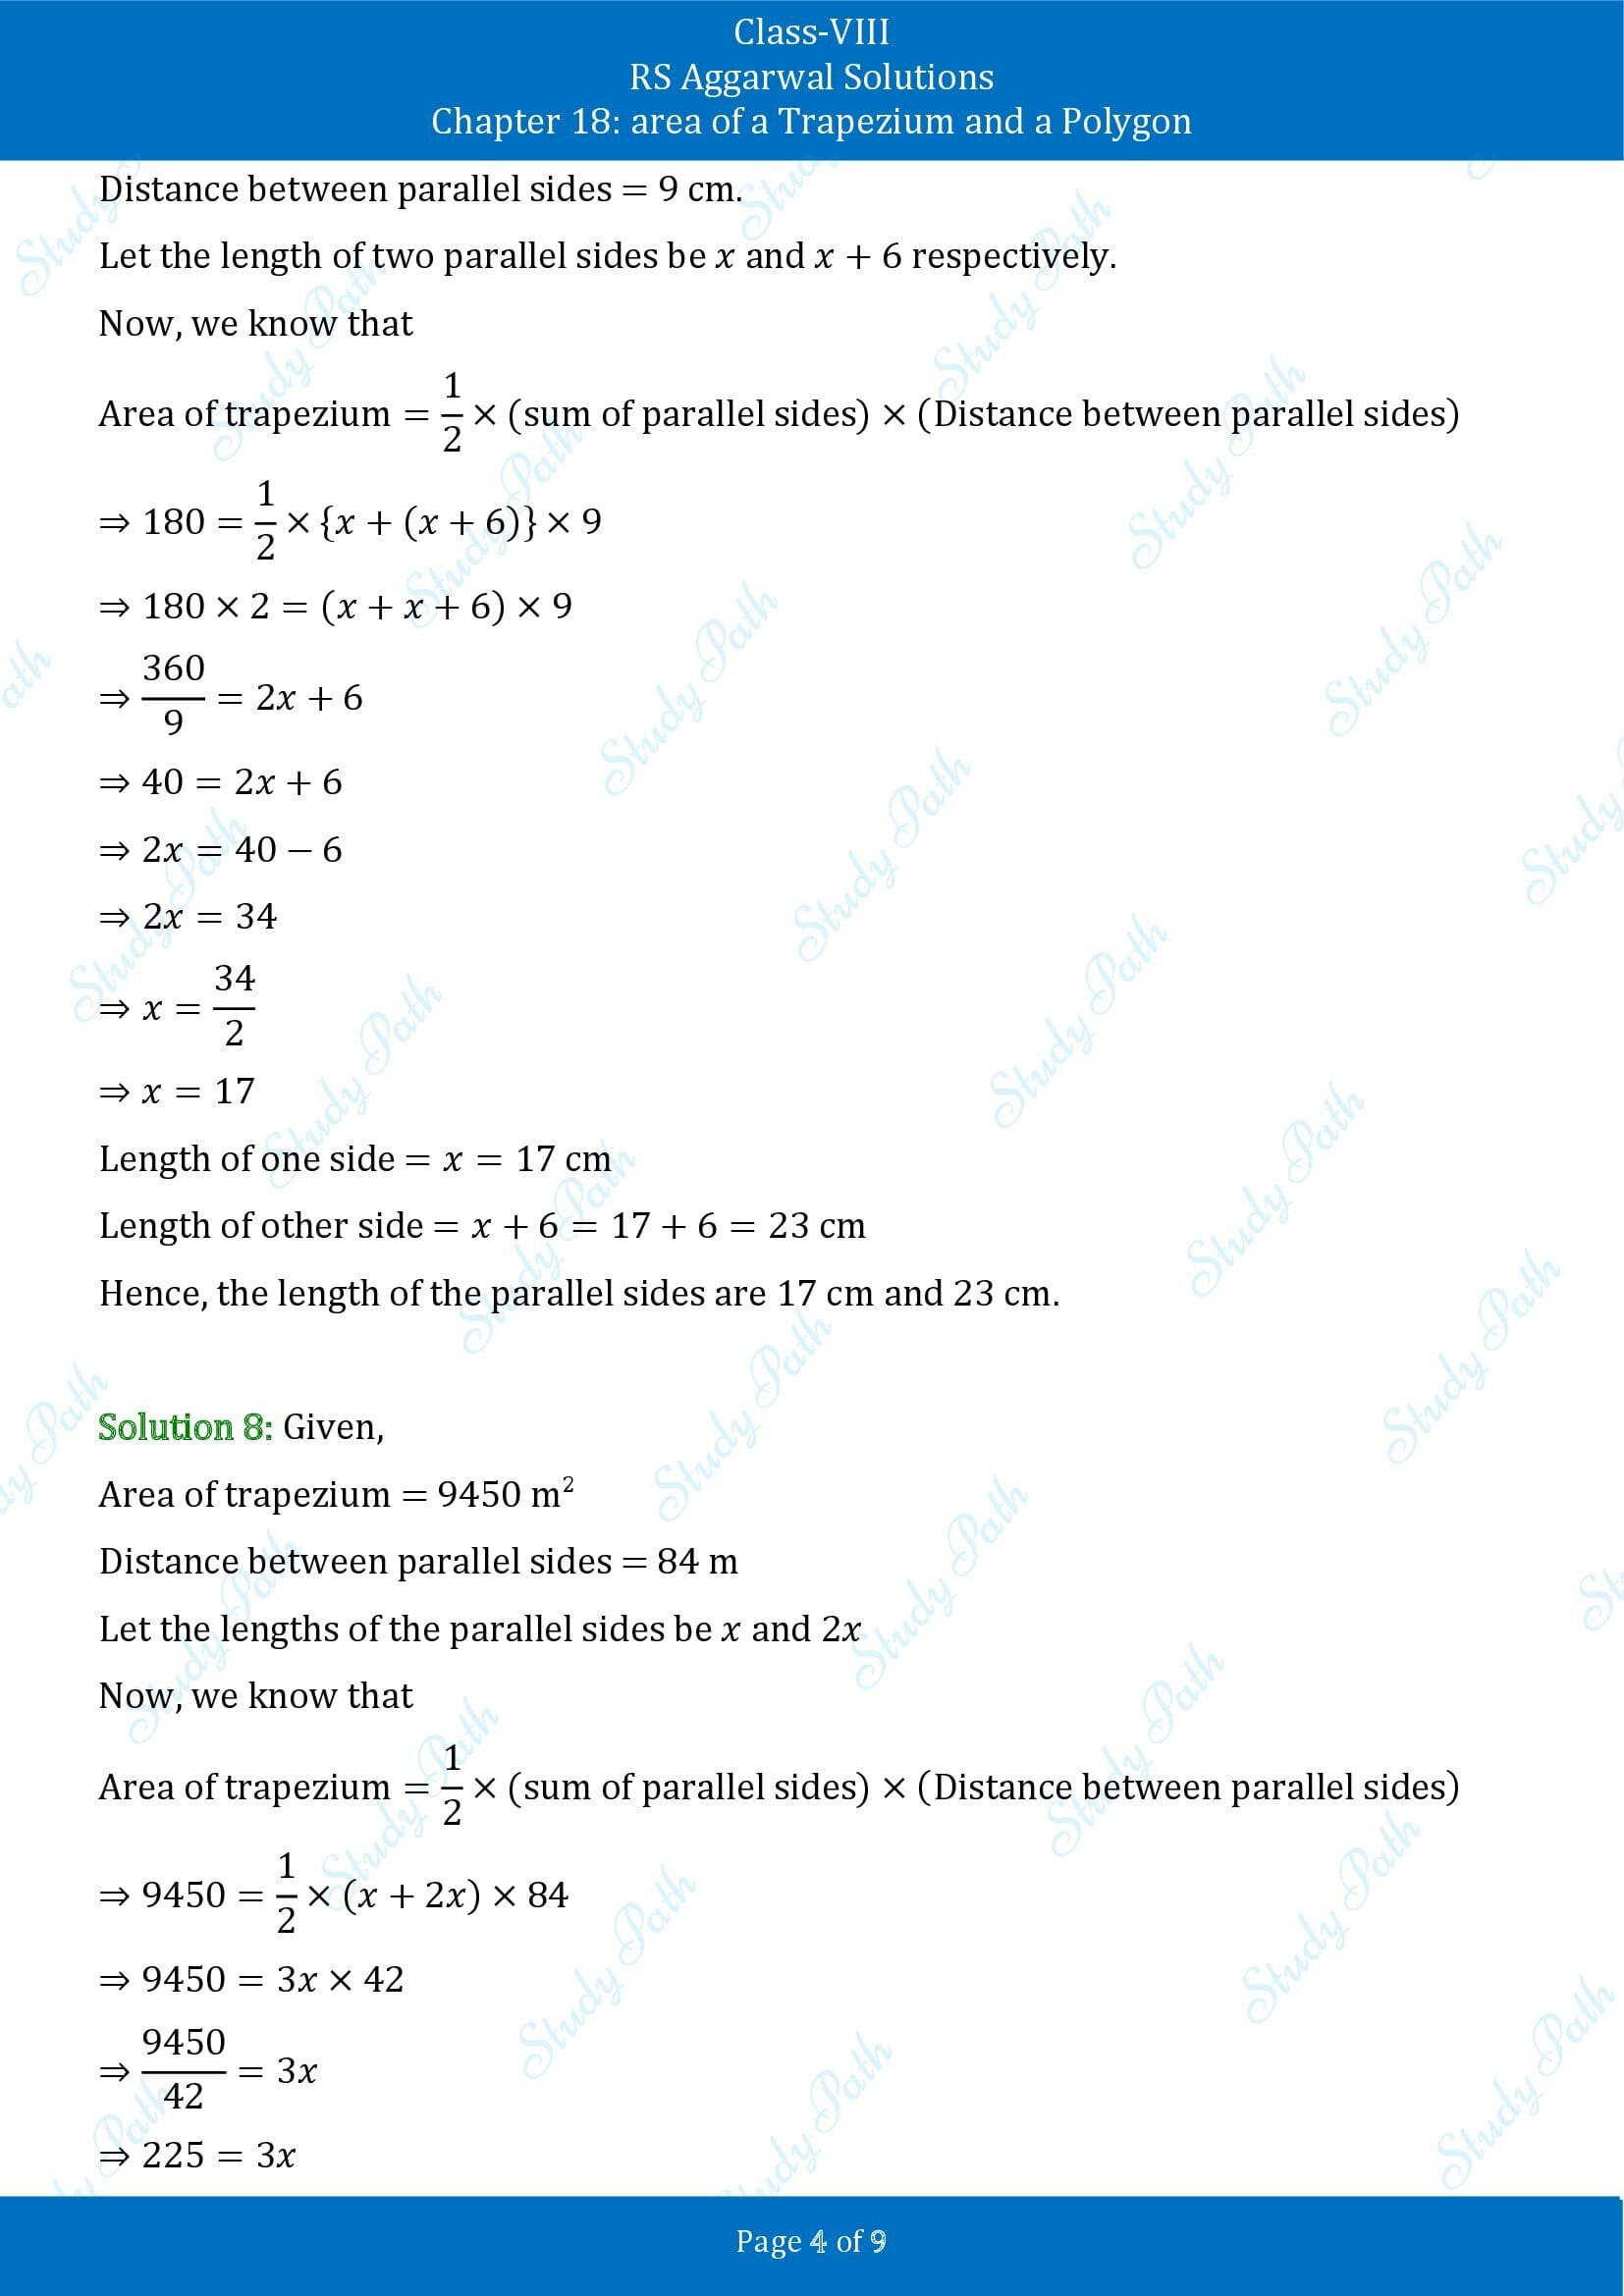 RS Aggarwal Solutions Class 8 Chapter 18 Area of a Trapezium and a Polygon Exercise 18A 00004